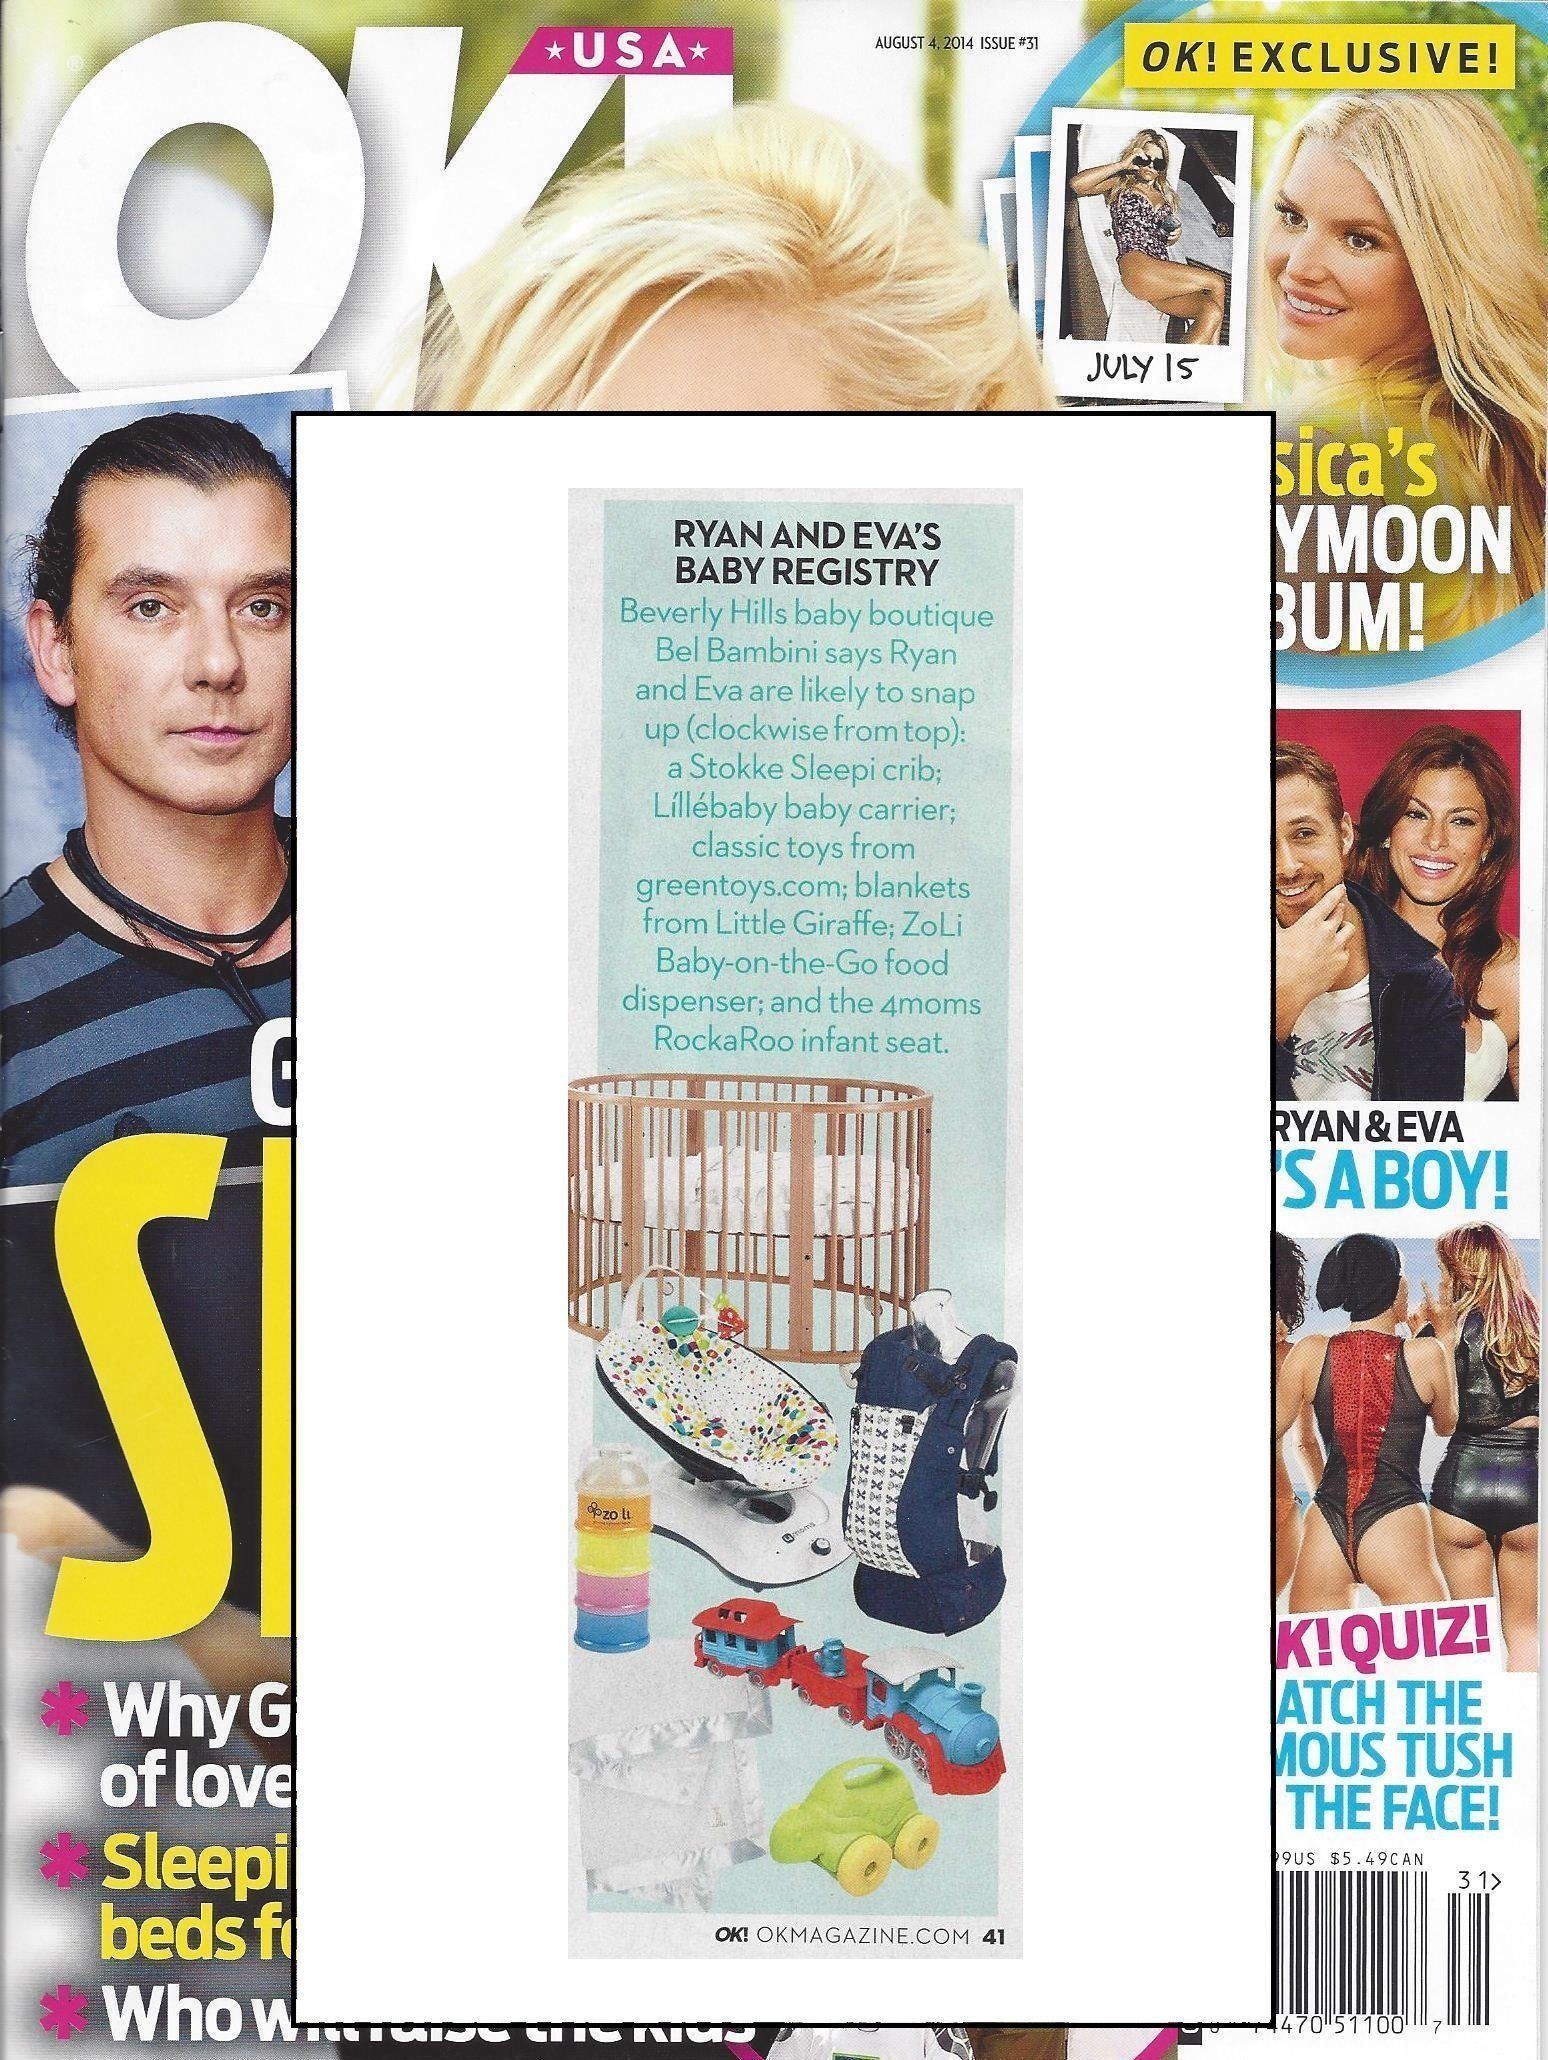 The perfect baby gift, as seen in Aug. 2014 issue of OK! Magazine.